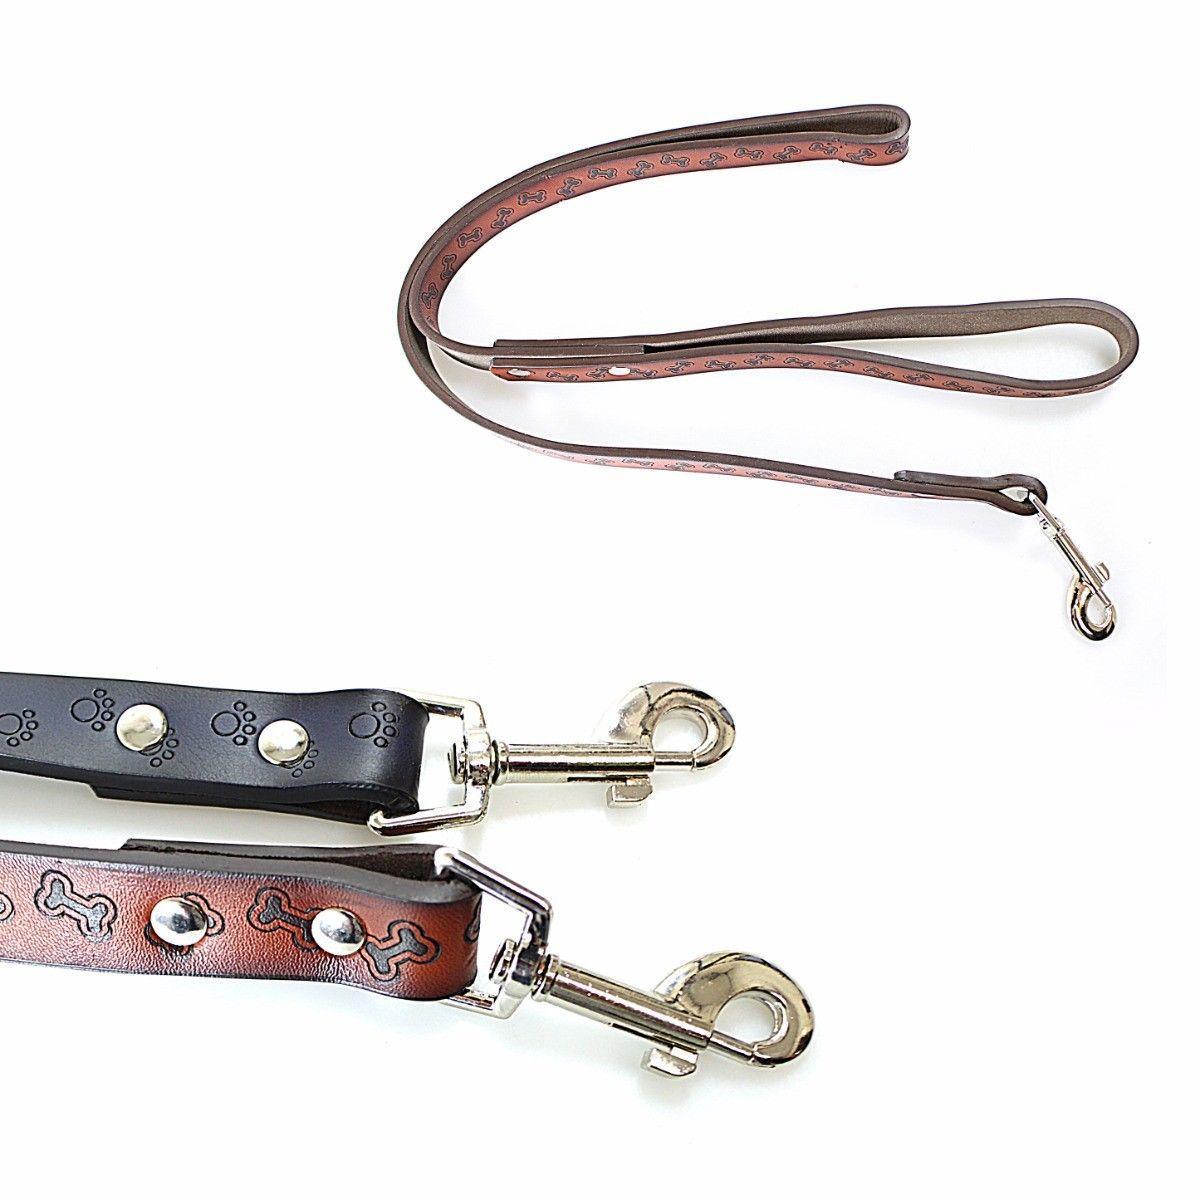 Durable Printed Leather Look Rubber Dog Lead/Leash With Strong Grip Ap ...